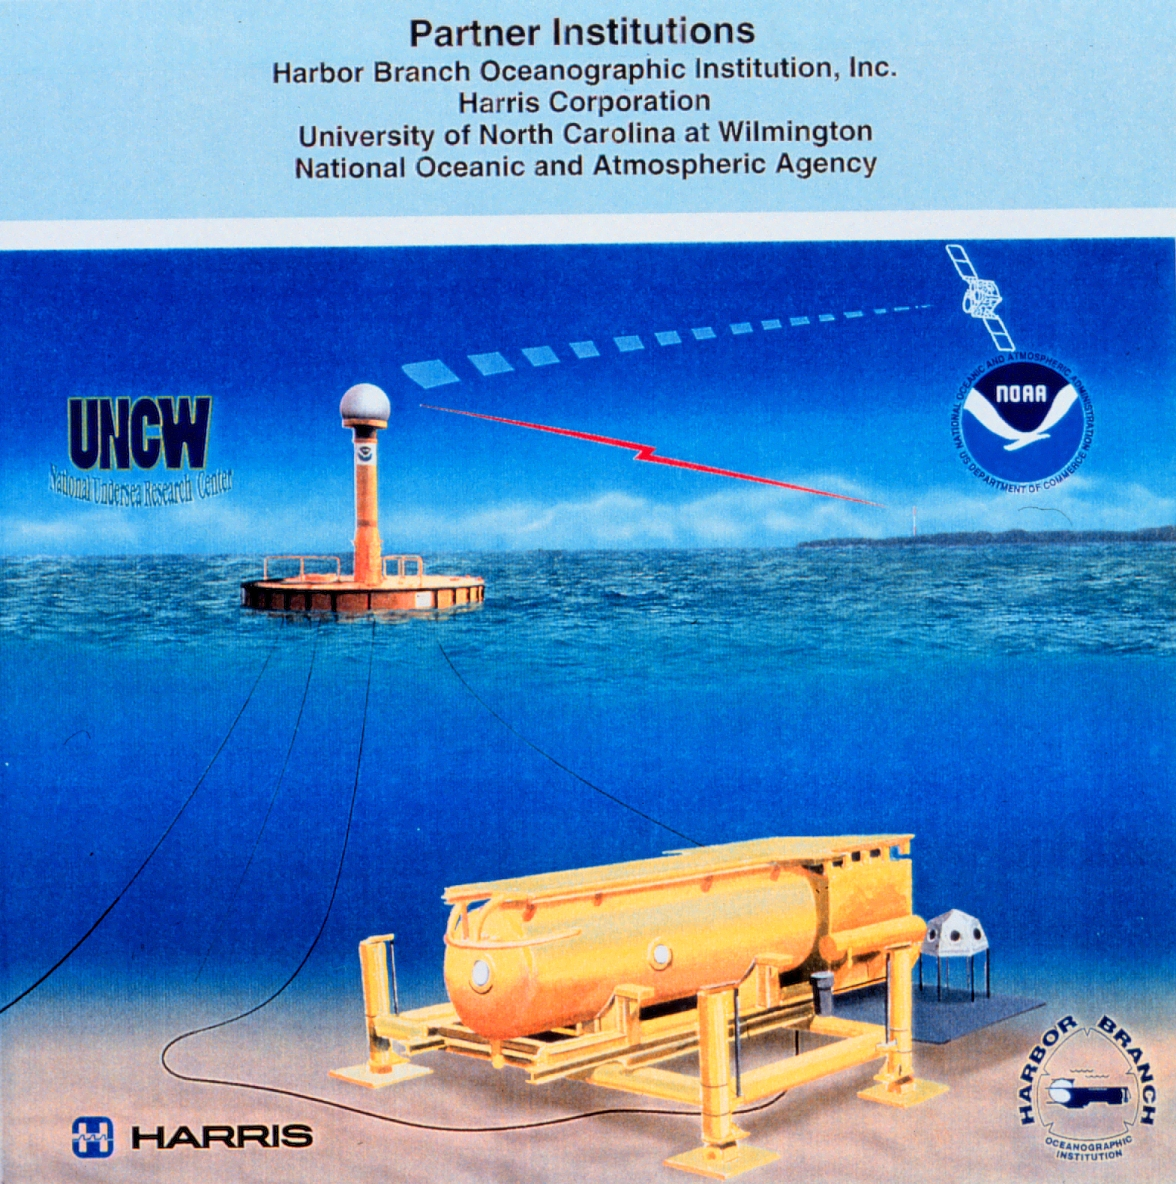 In 1997, a partnership of industry and government rebuilt AQUARIUS